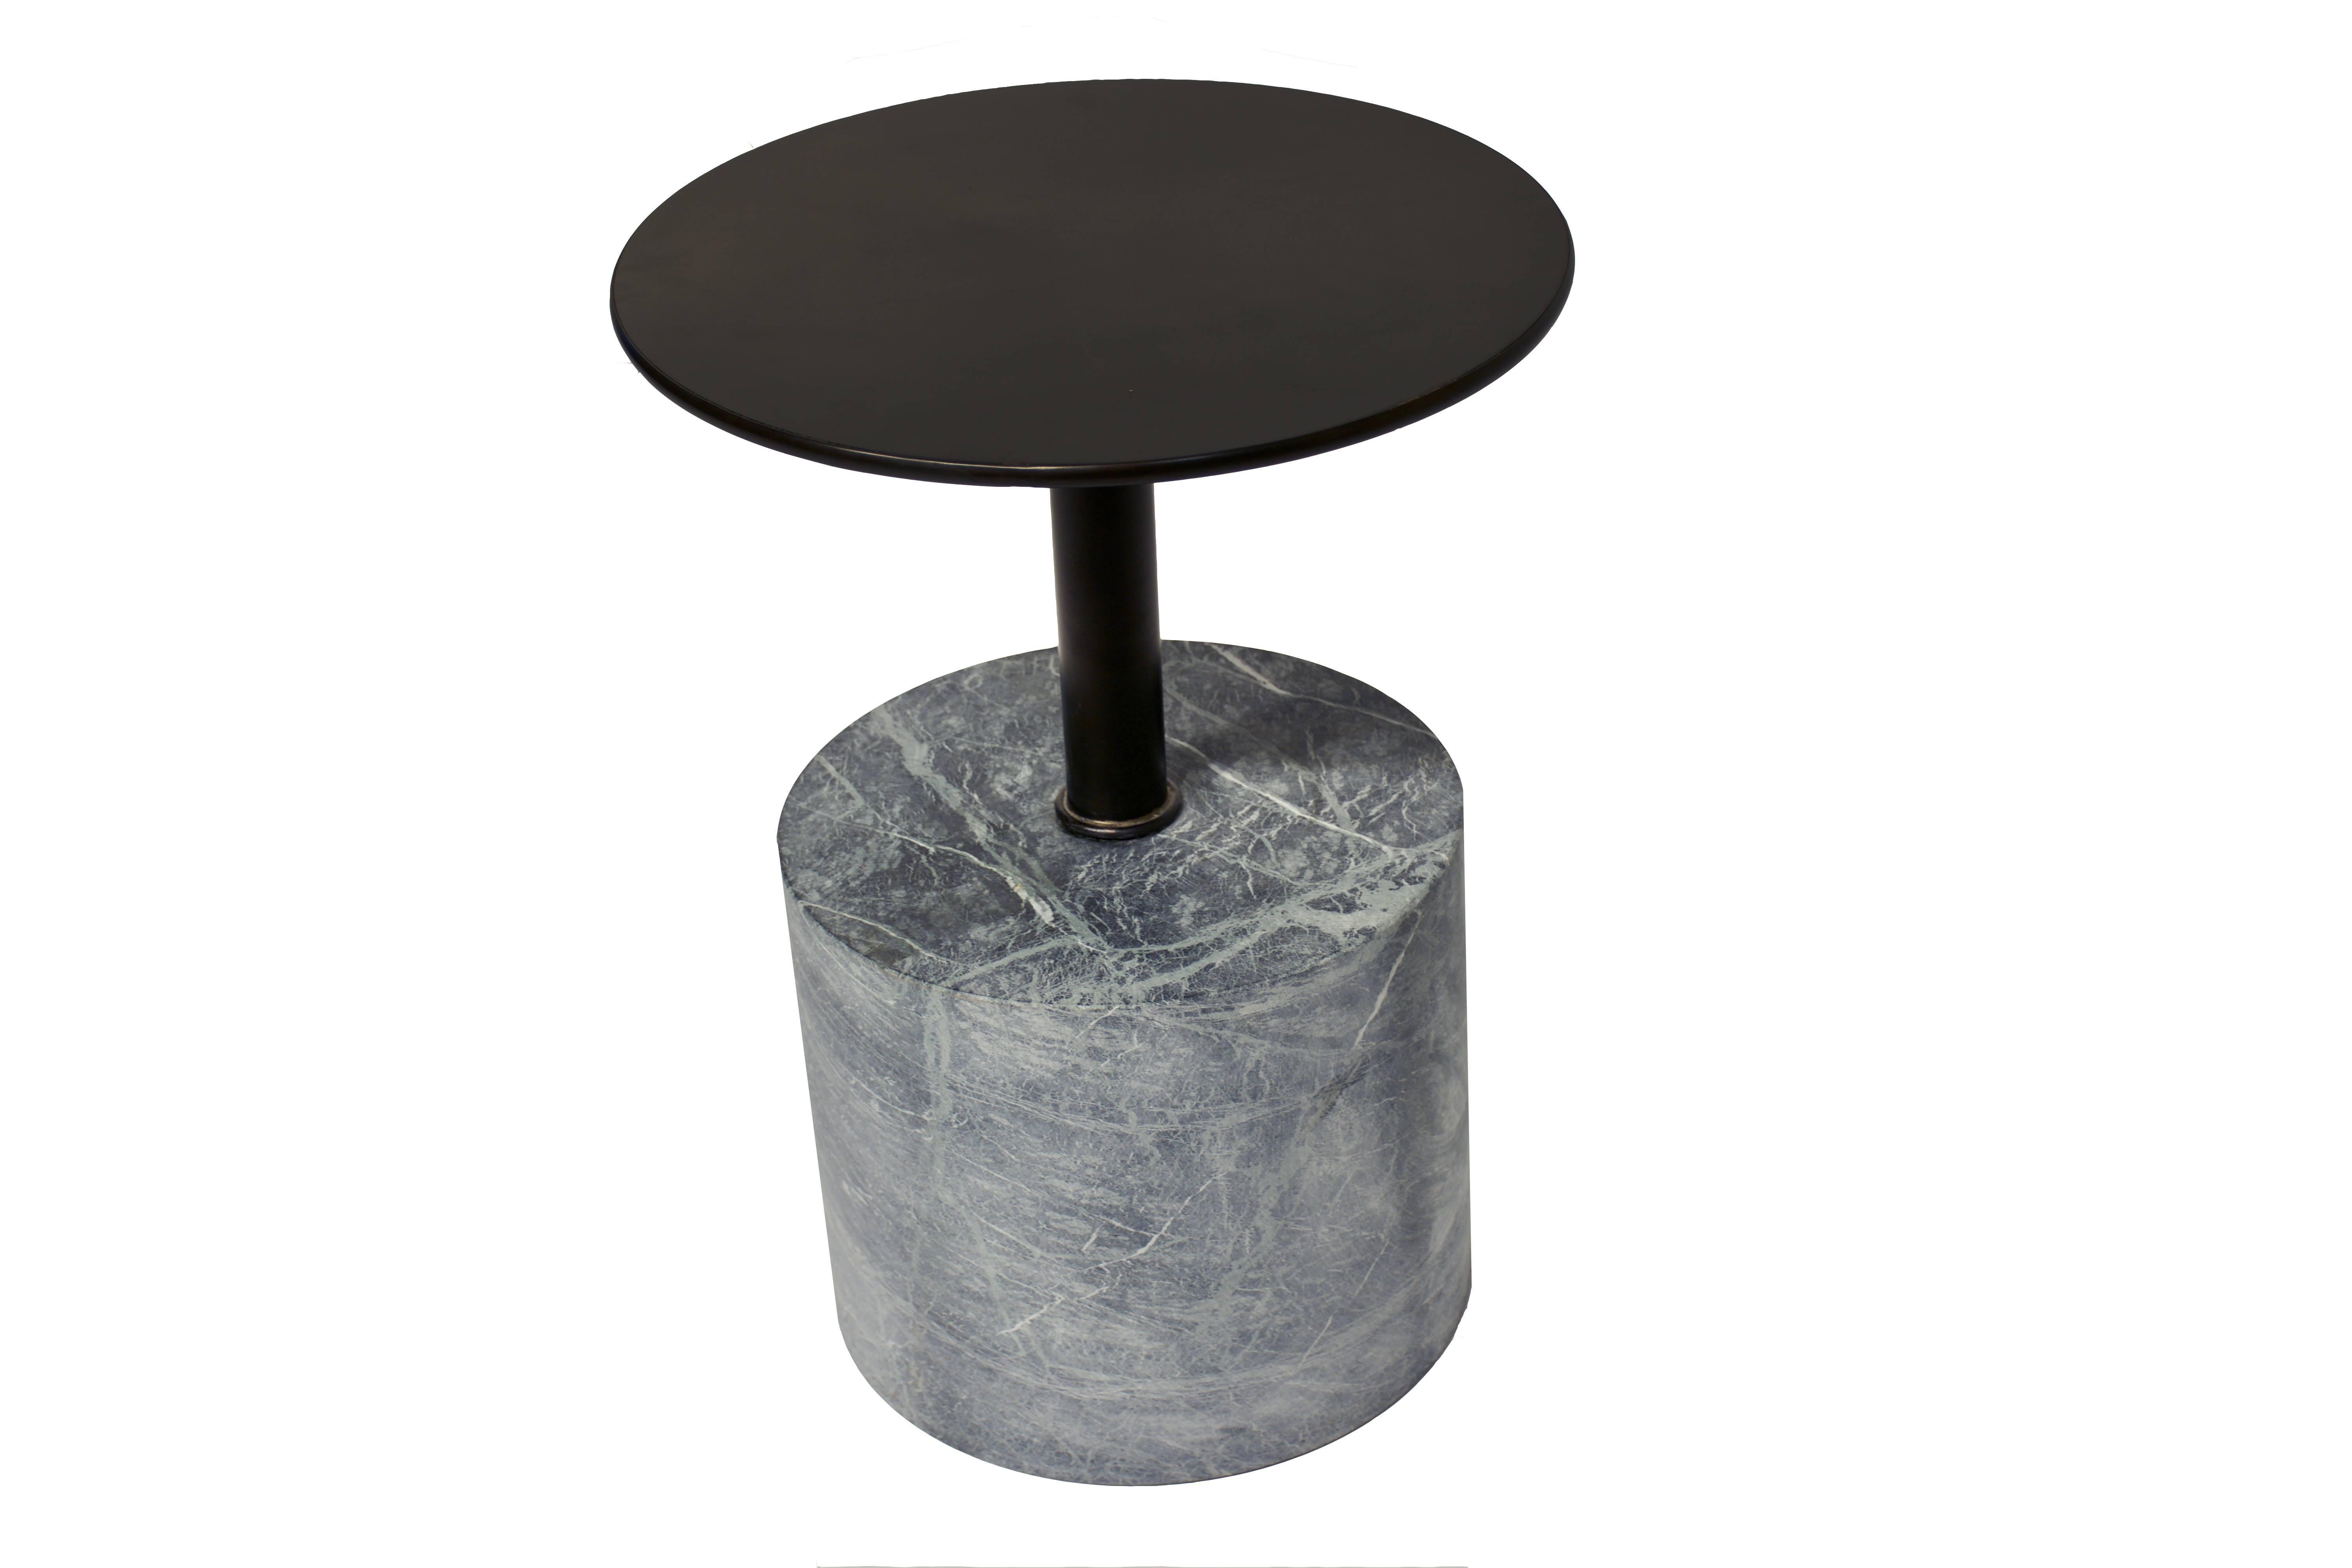 Organic Modern Modernist End Table, Honed Verde Alpi Marble Base with Patined Steel Top